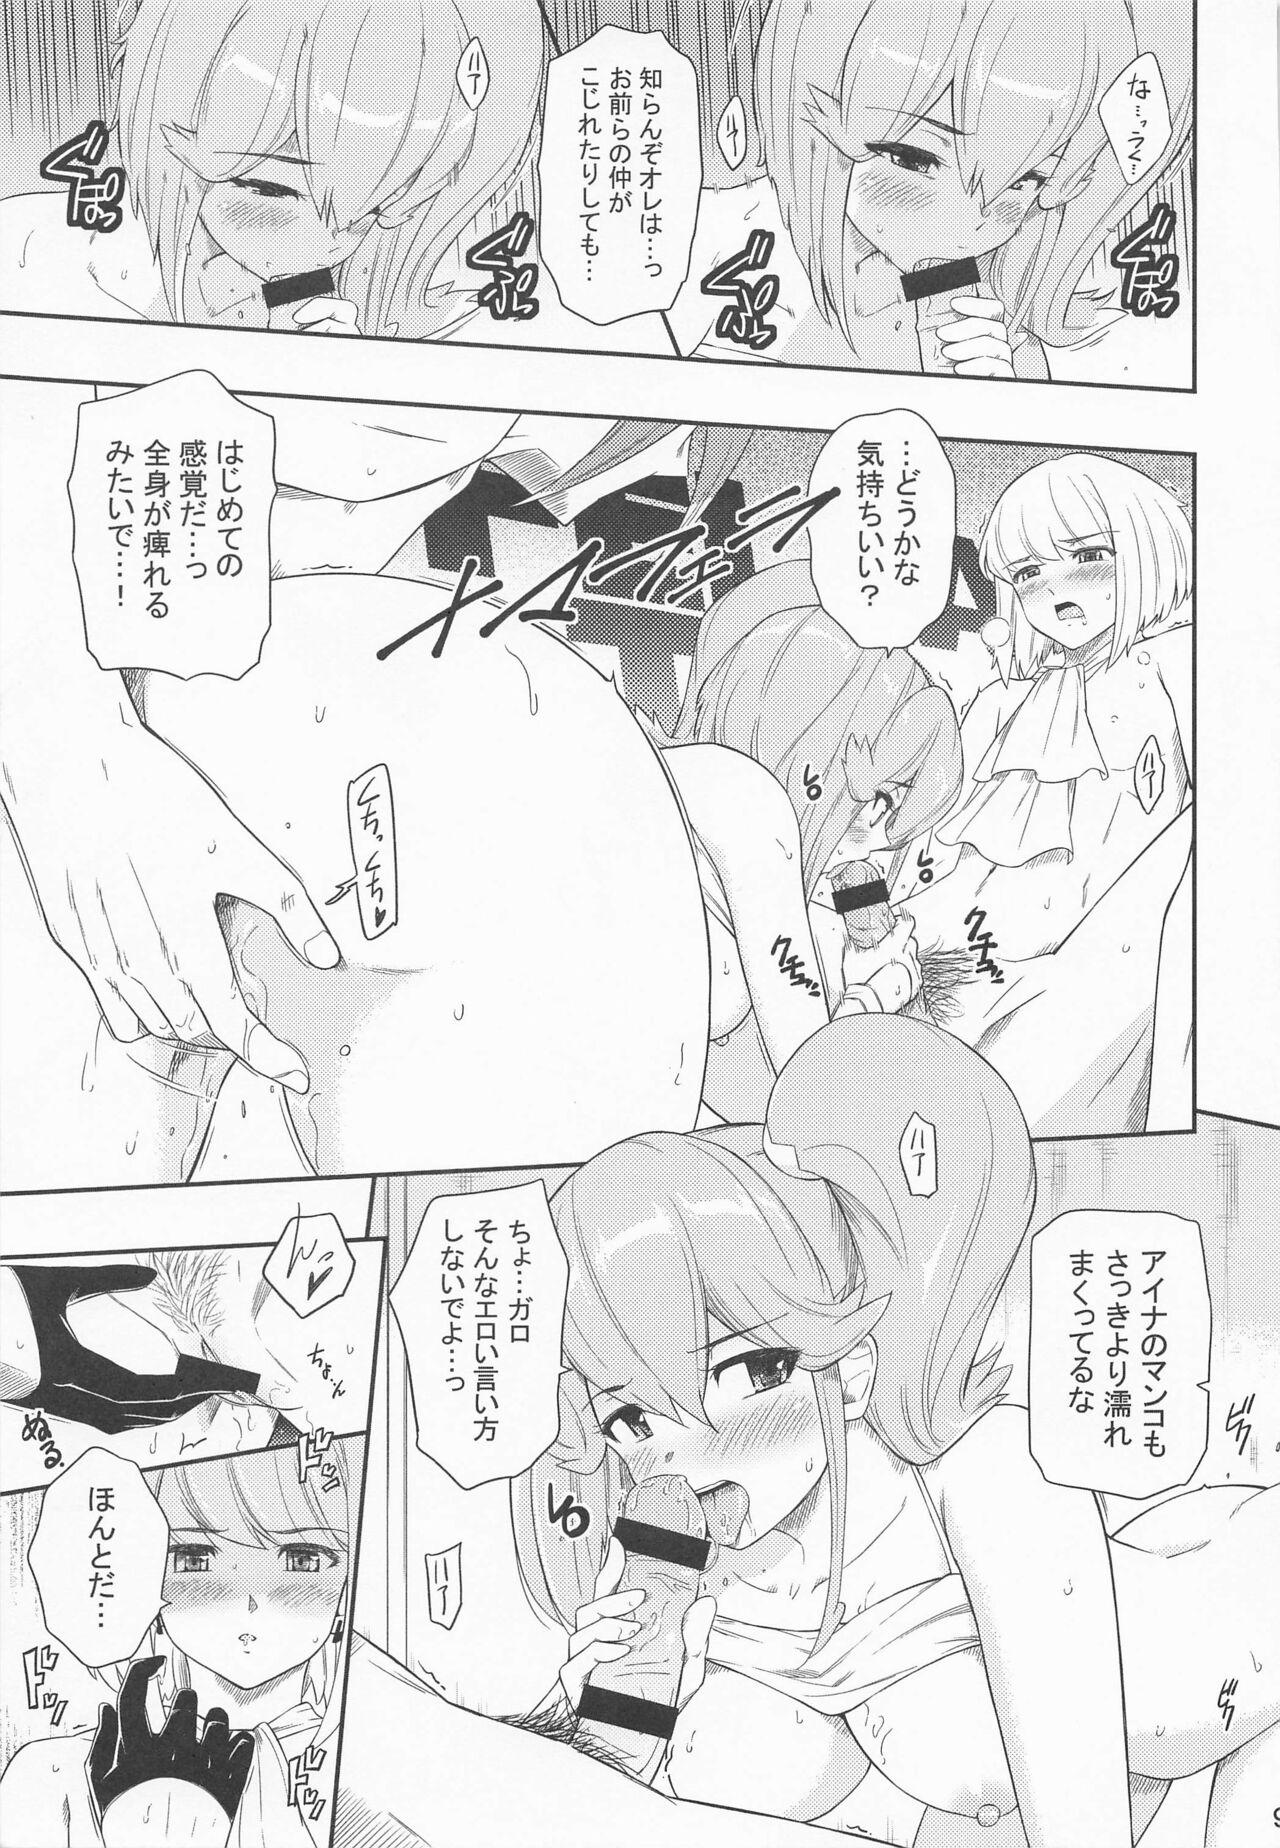 Orgasmus EROMARE - Suddenly 3P sex is happening... - Promare Concha - Page 8